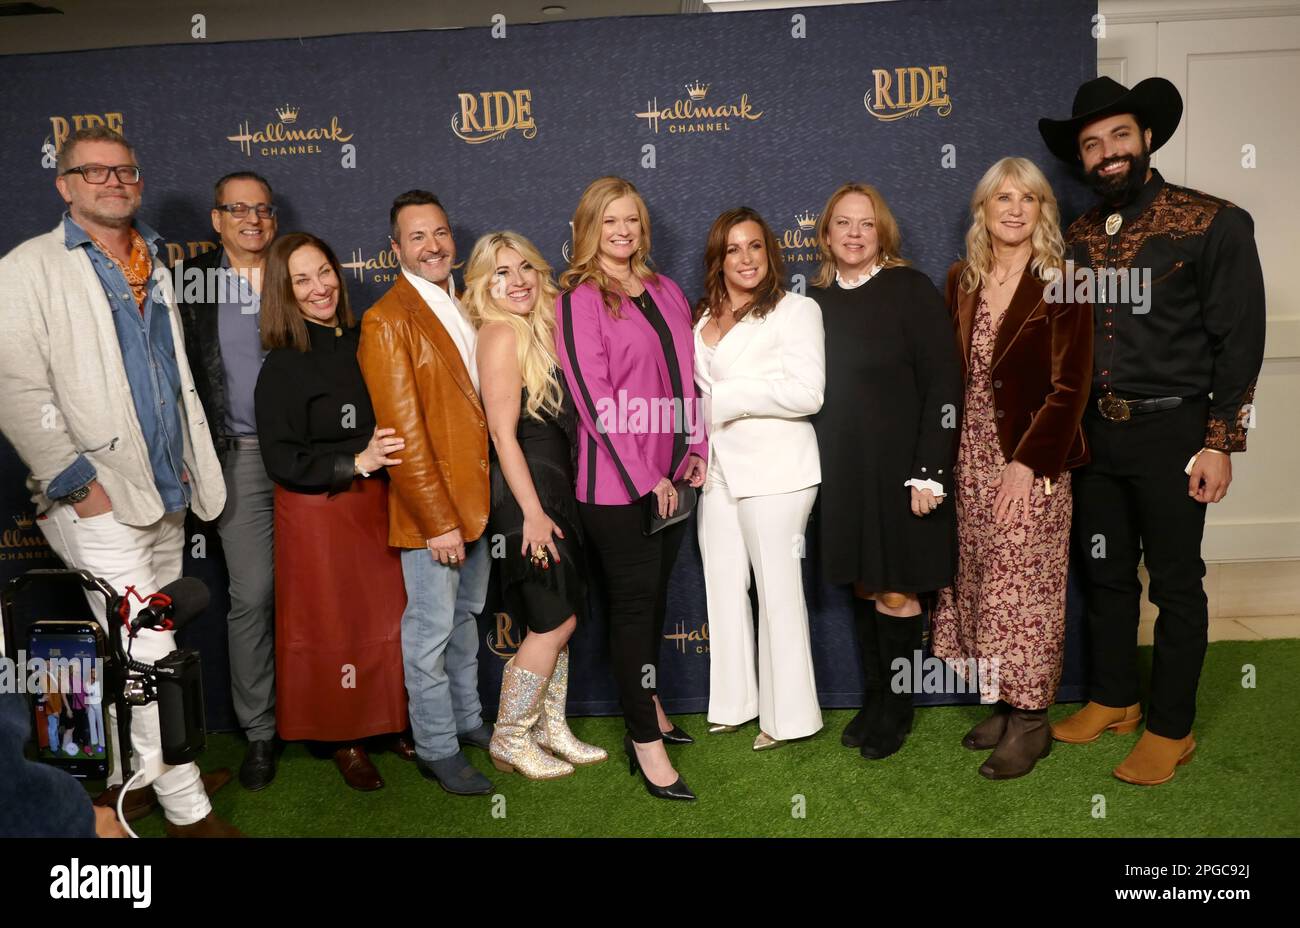 West Hollywood, California, USA 21st March 2023 (L-R) Guest, John Morayniss, Elena Barry, Guest, Rebecca Boss, Laurie Ferneau, Carolyn Newman, Lisa Hamilton Daly, Virginia Rankin and Chris Masi attend Los Angeles Premiere of Hallmark's 'Ride' at The London Hotel on March 21, 2023 in West Hollywood, California, USA. Photo by Barry King/Alamy Live News Stock Photo